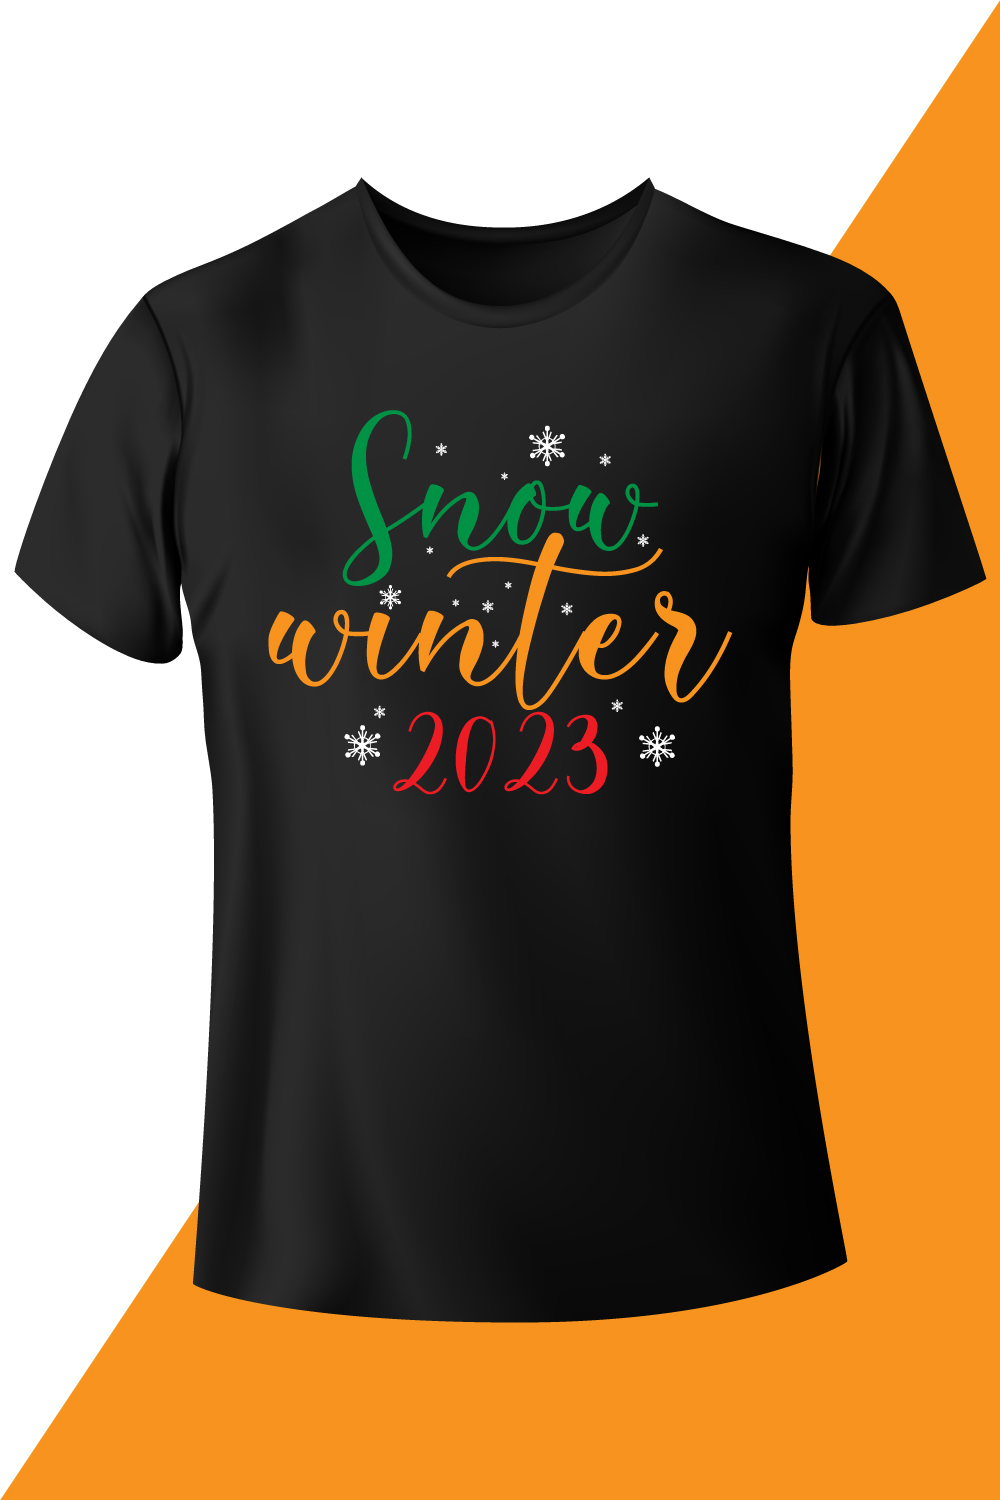 Picture of a black t-shirt with colorful Snow Winter 2023 print.